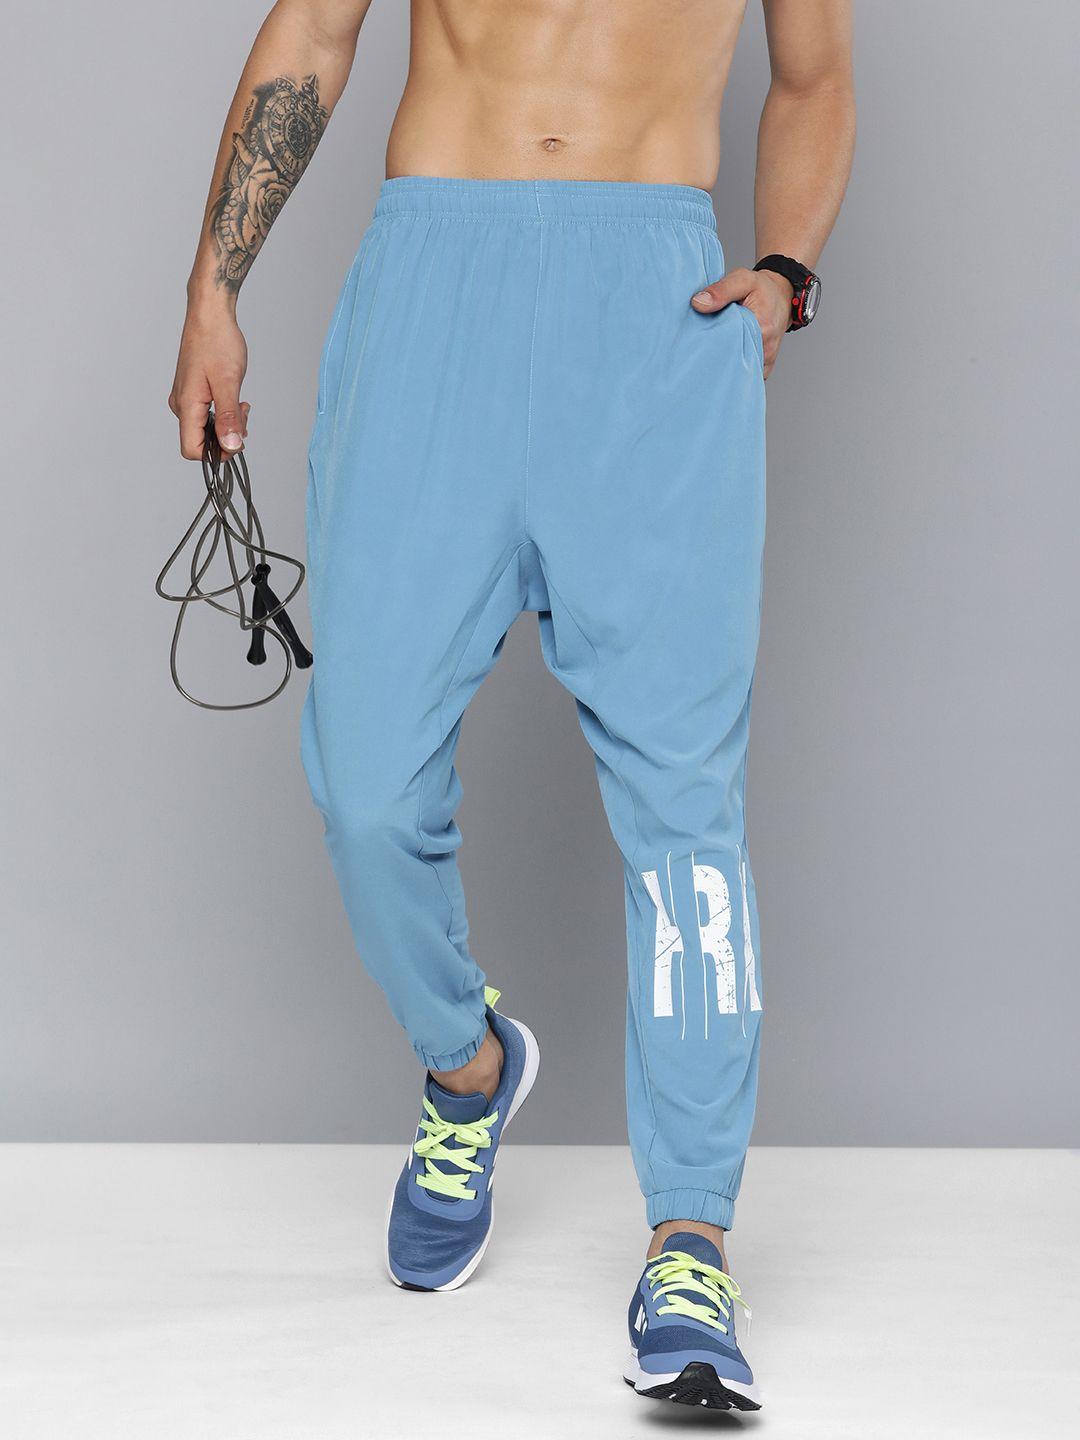 hrx by hrithik roshan men antimicrobial finish rapid-dry training joggers track pants